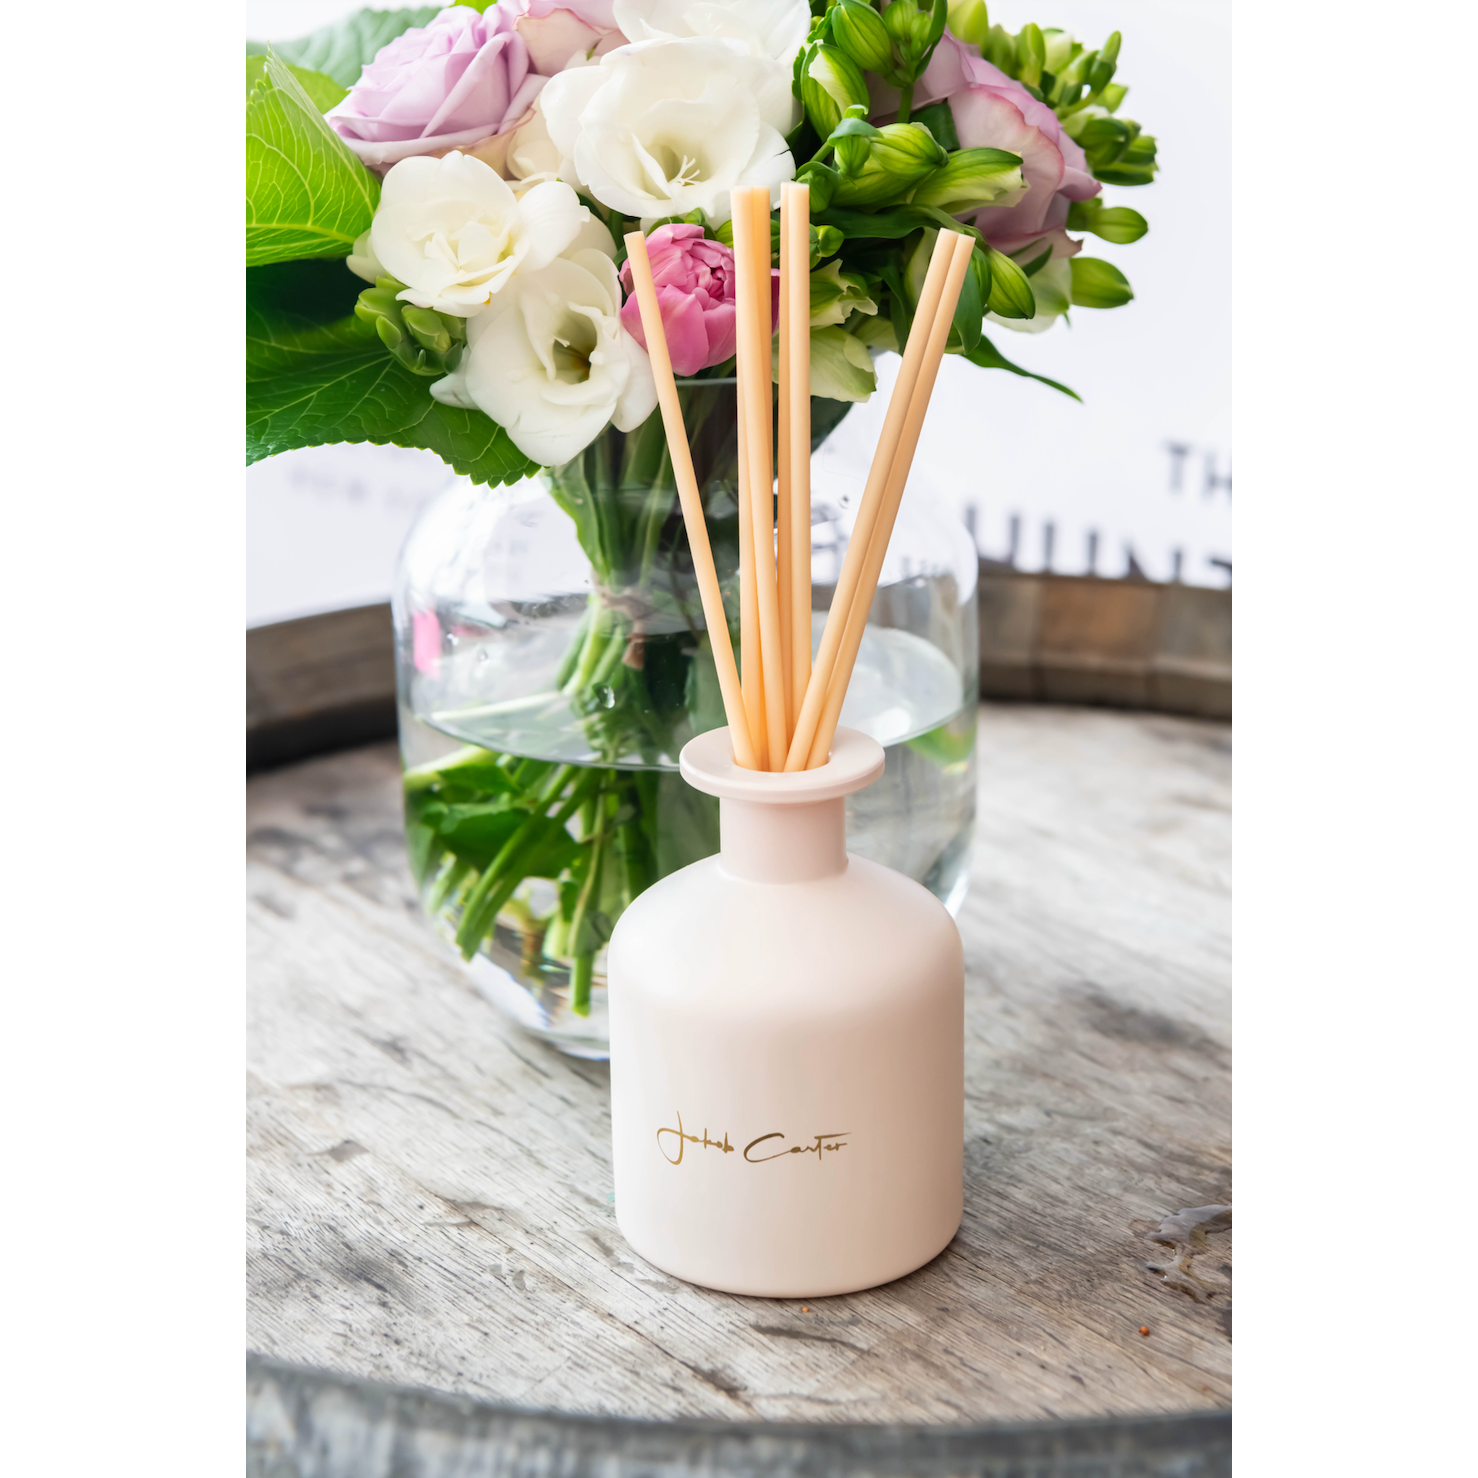 FRENCH PEAR & VANILLA TRIPLE SCENTED REED DIFFUSER